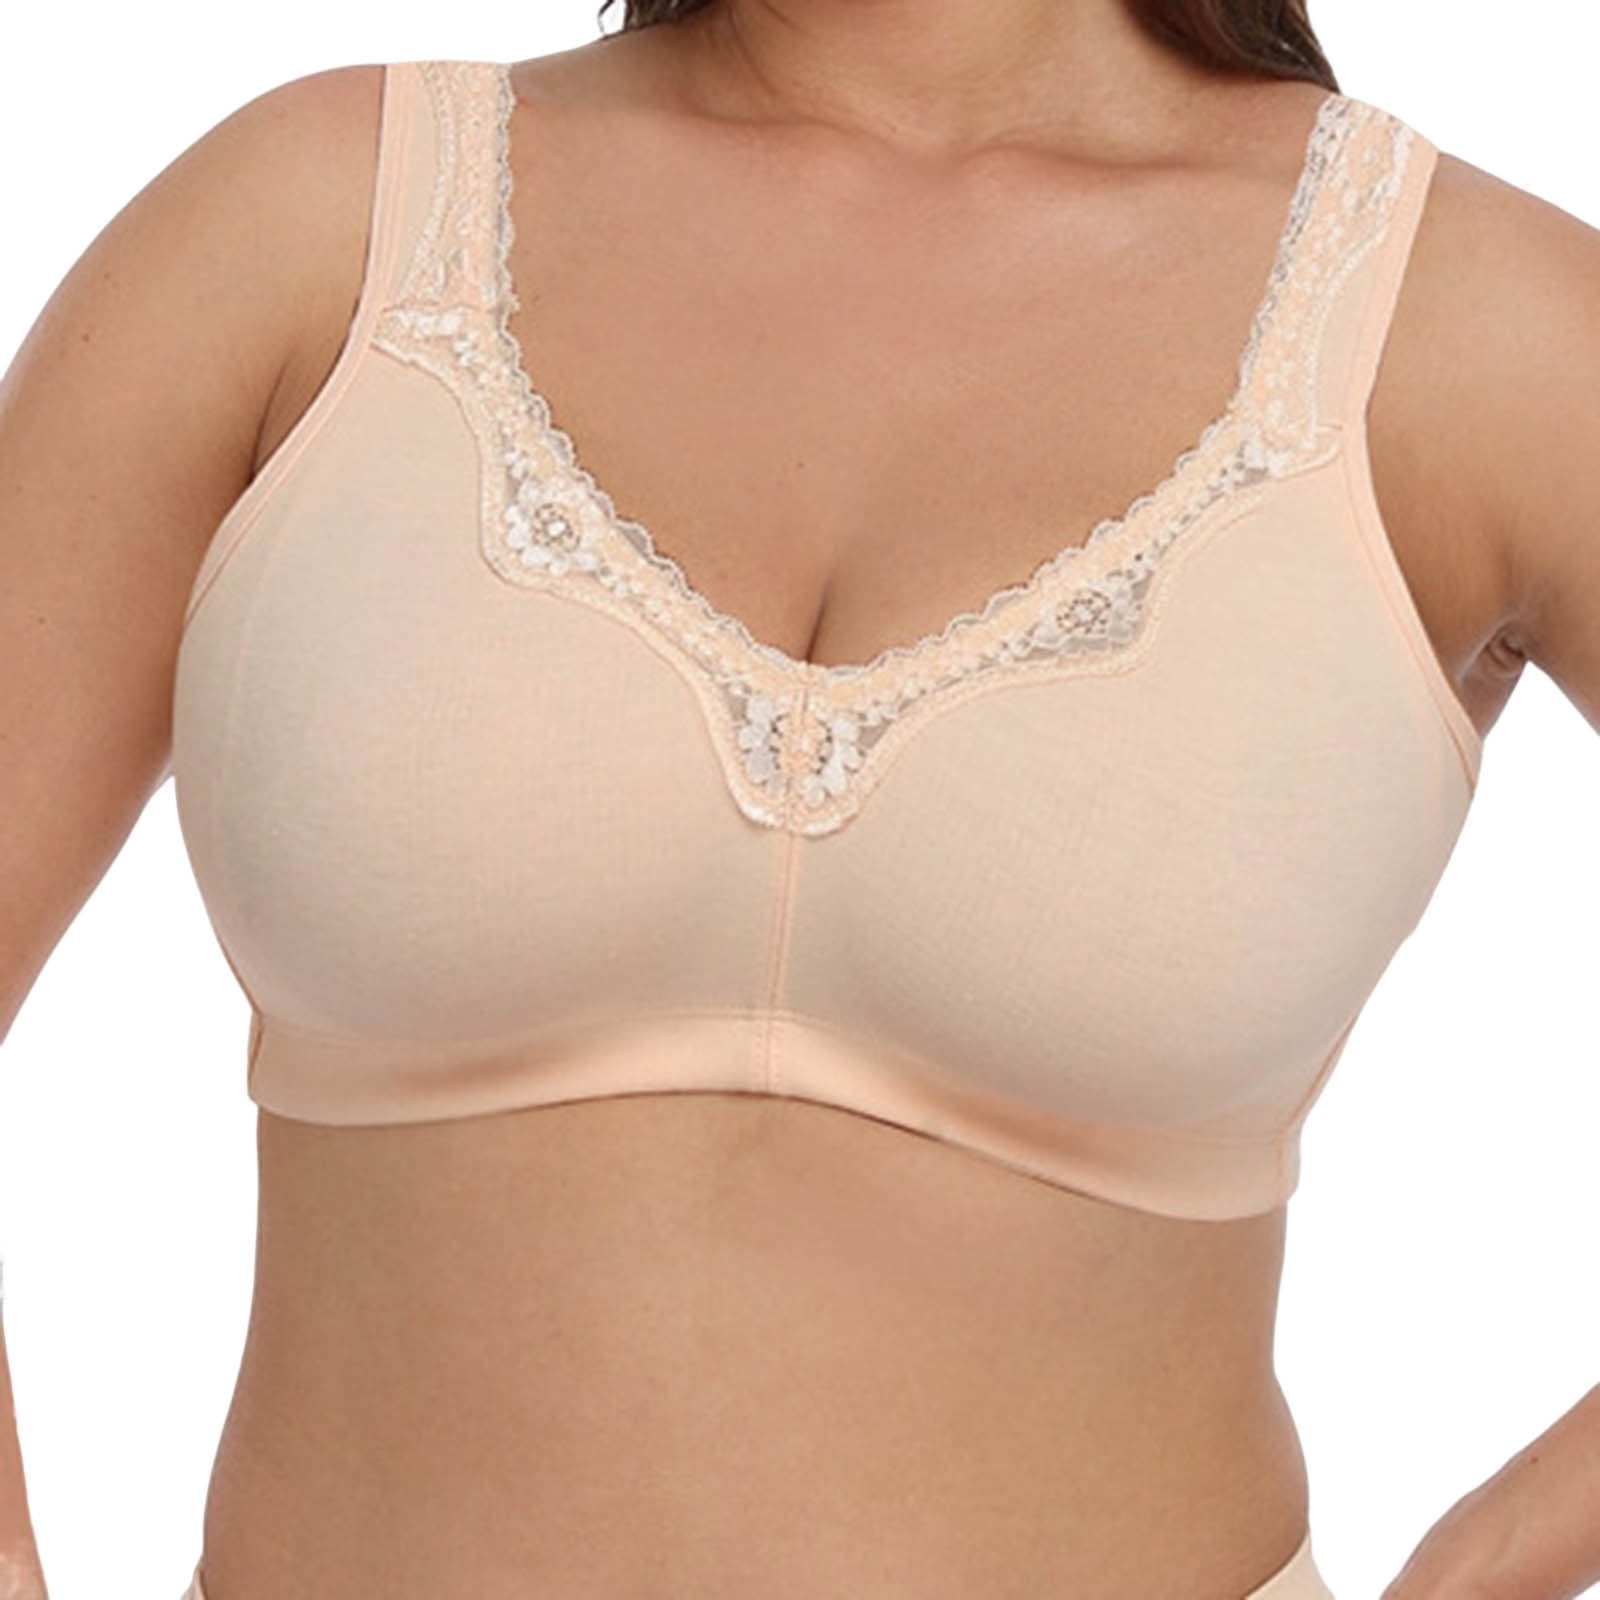 QUYUON Clearance Balconette Bra Women's Large Breathable,Sweat